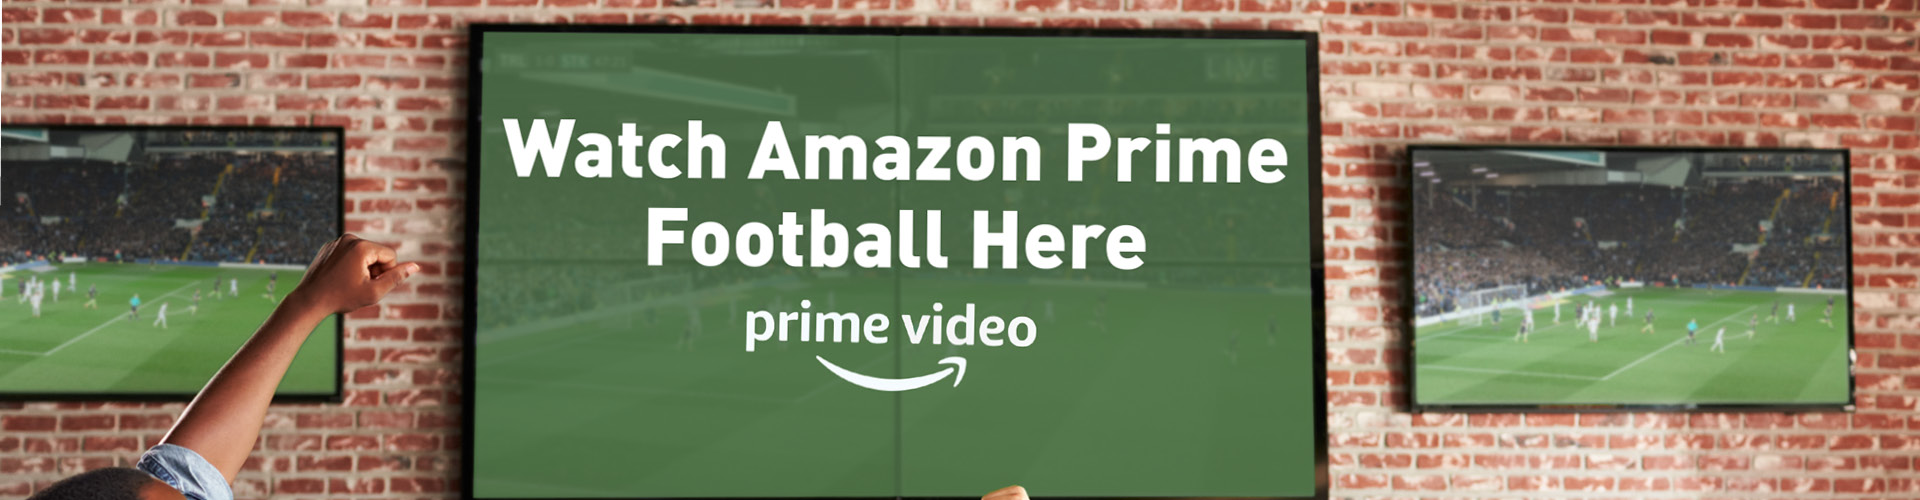 Watch Amazon Prime football at Fox & Hounds in Putney